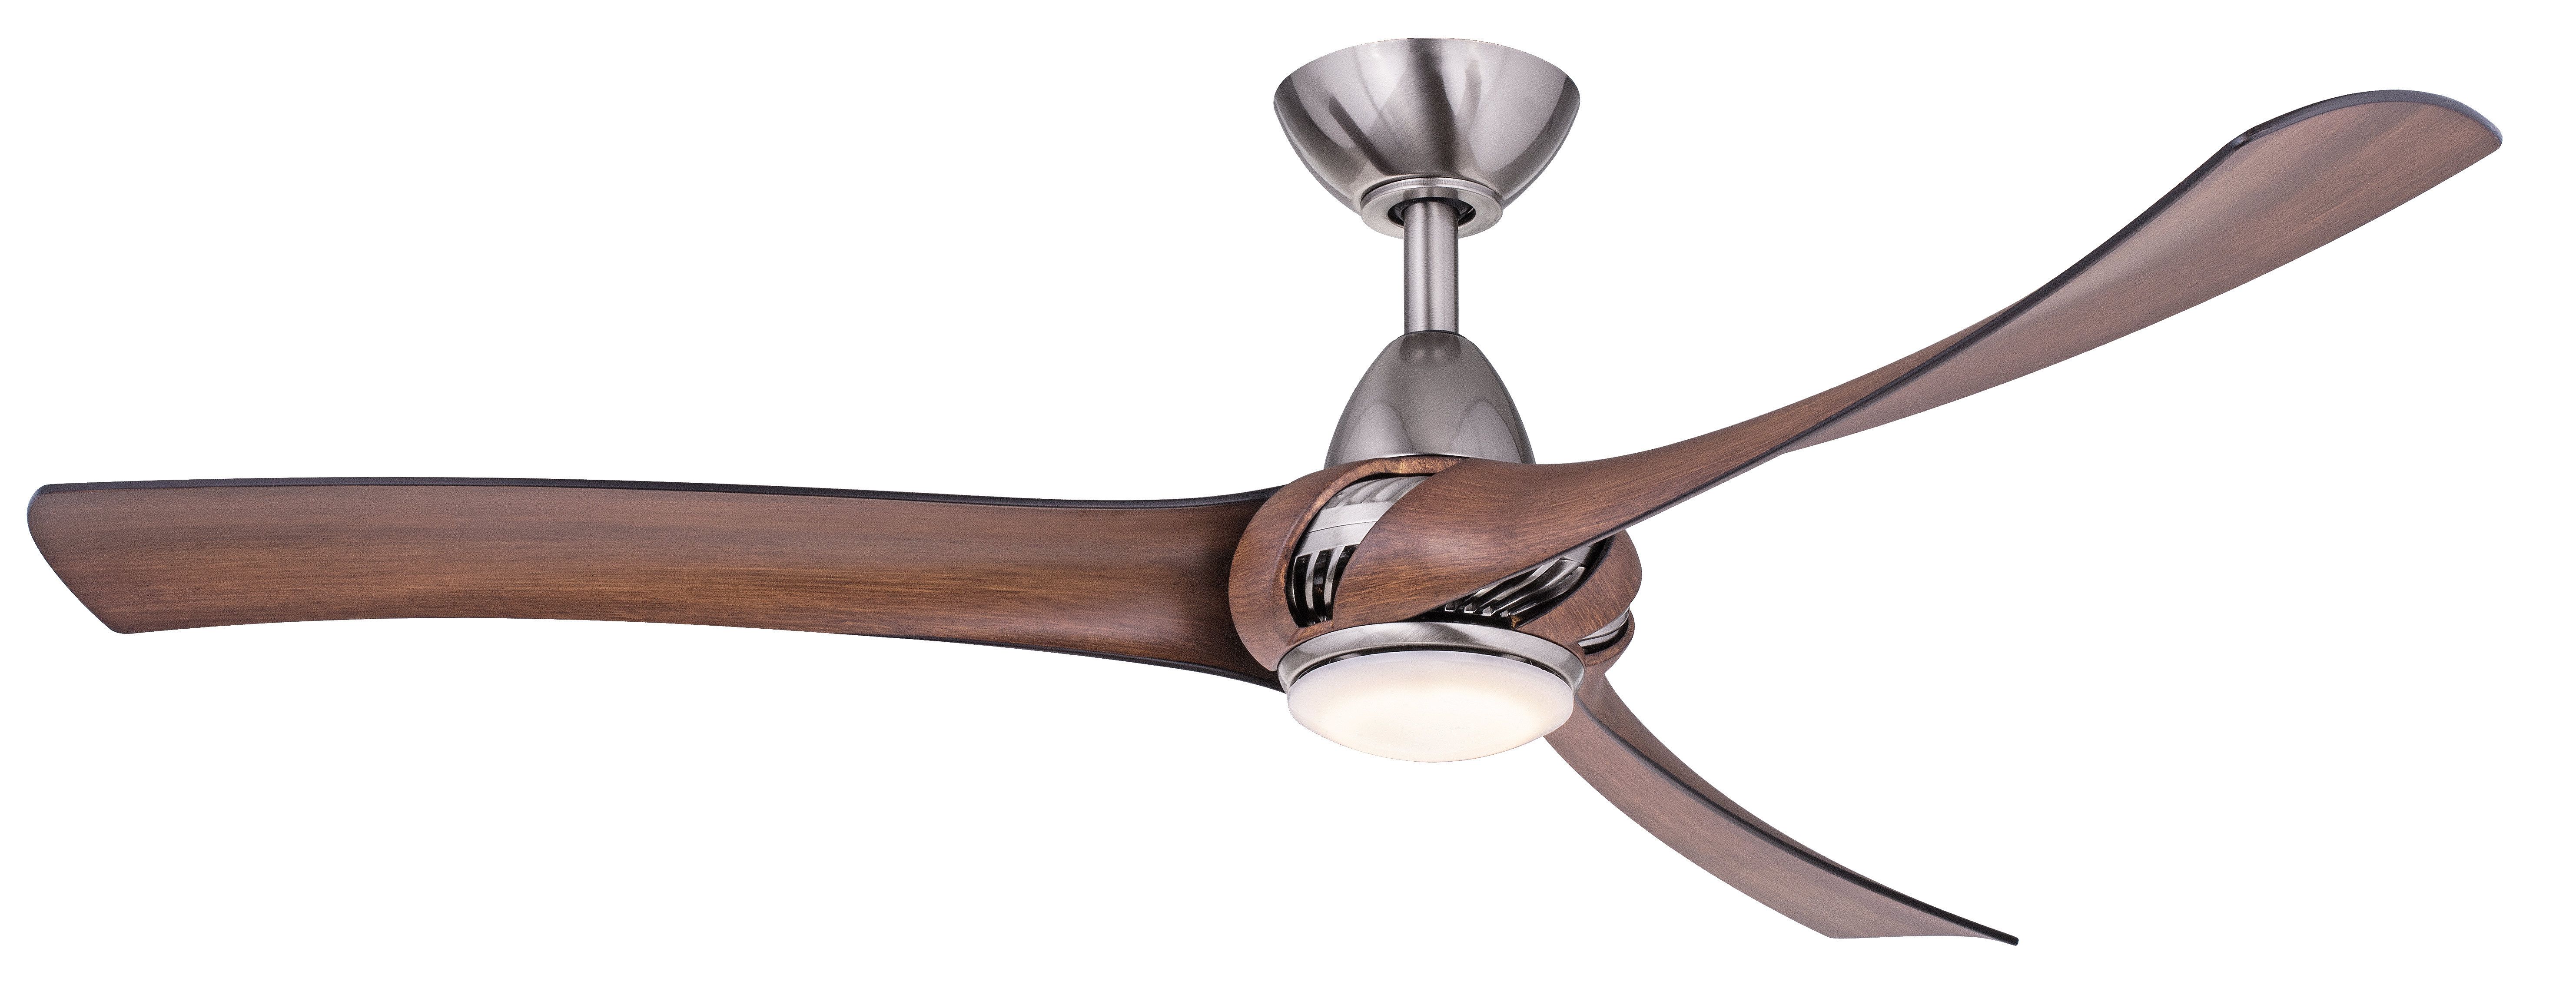 Most Up To Date 52'' Cairo 3 Blade Led Ceiling Fan With Remote, Light Kit Included Pertaining To Troy 3 Blade Led Ceiling Fans (View 2 of 20)